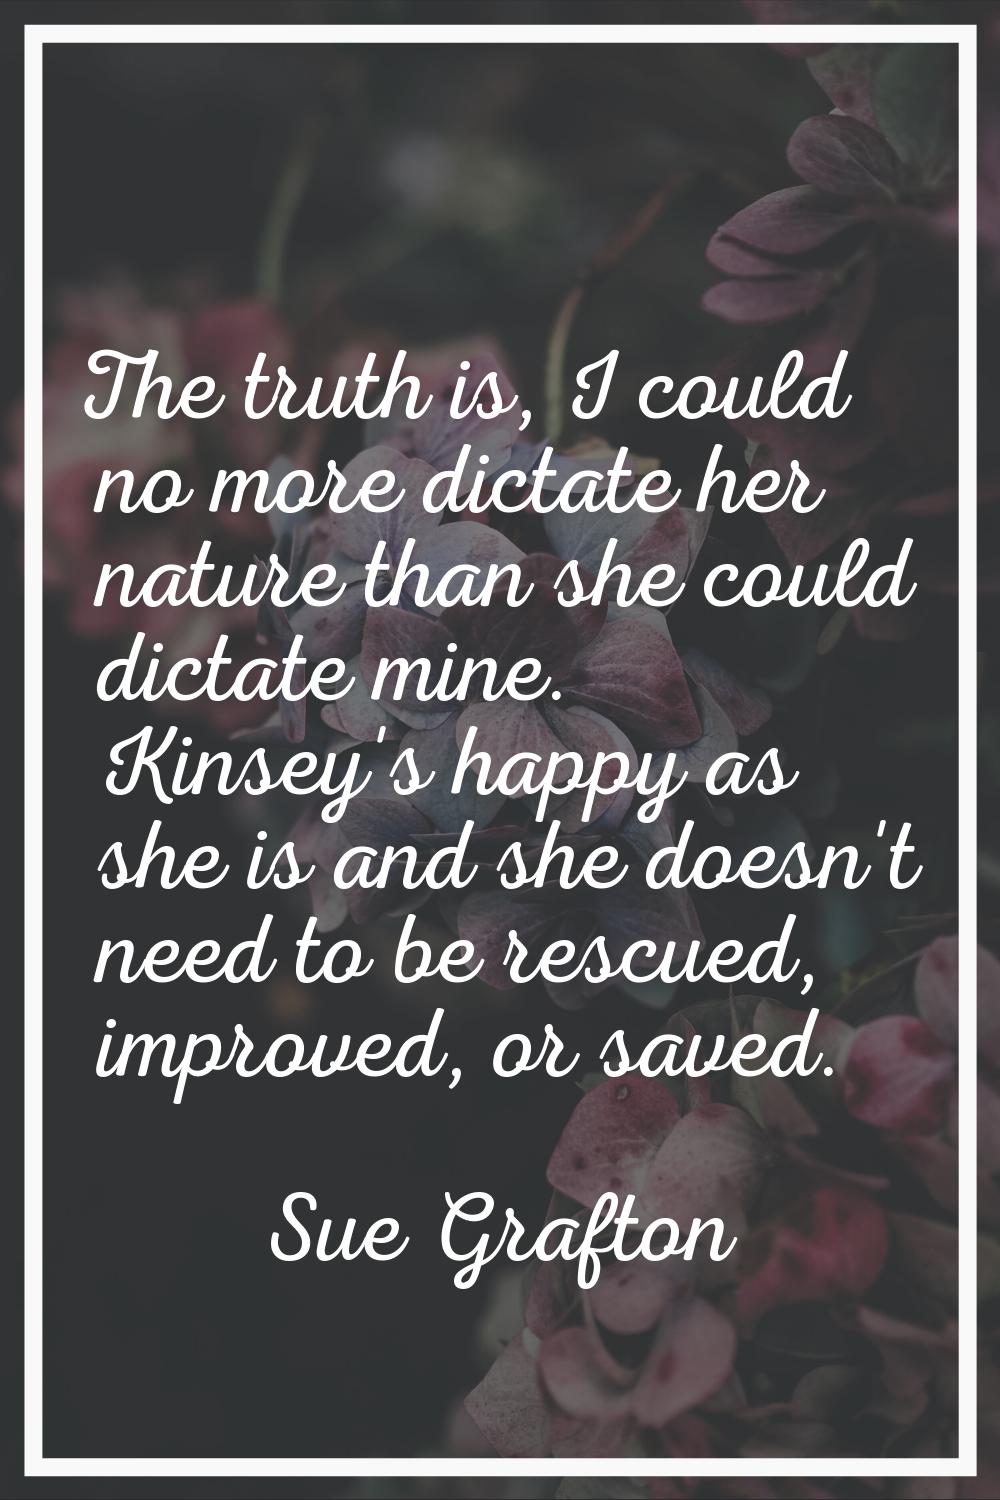 The truth is, I could no more dictate her nature than she could dictate mine. Kinsey's happy as she